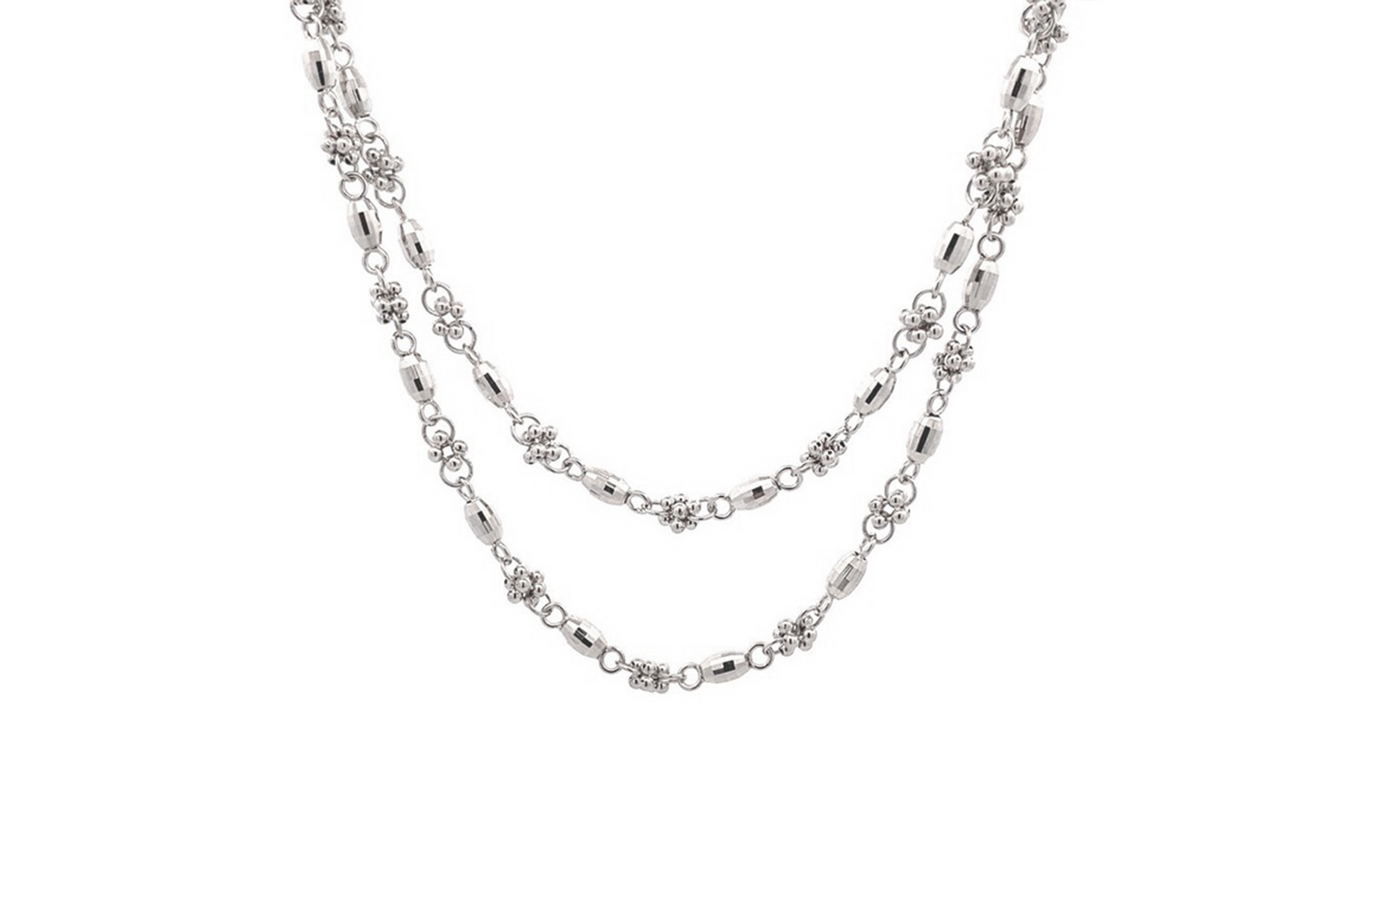 Bead Necklace in White Gold